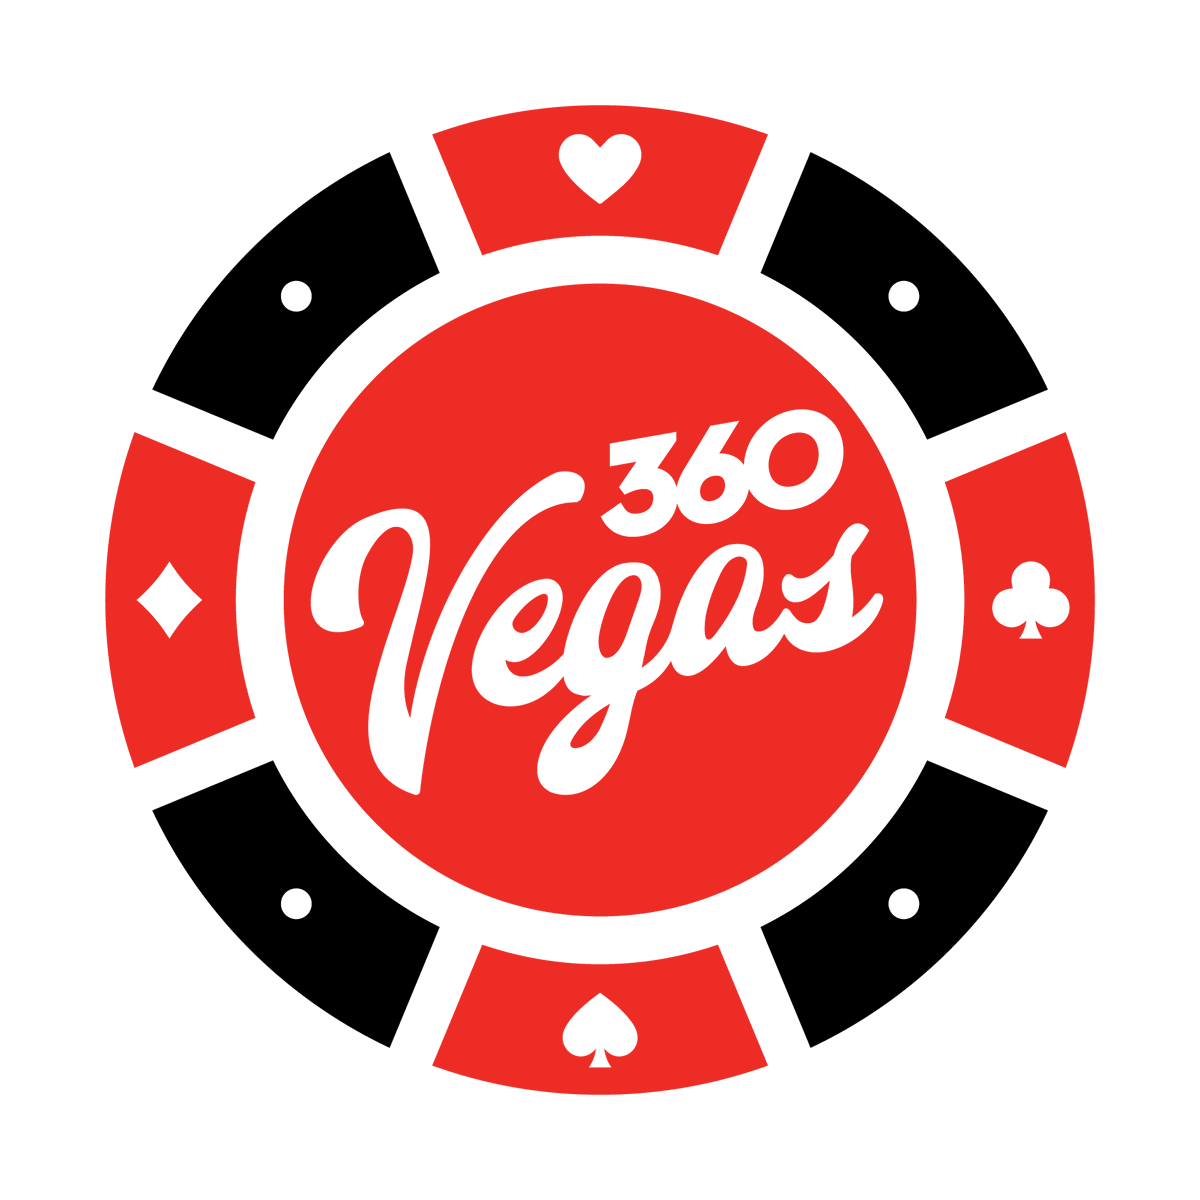 We are excited to announce that episode 8 of our '360 POV' series featuring the Martin Scorsese film 'Casino' is now available, EXCLUSIVELY to subscribers at Patreon.com/360Vegas 

As always, thank you so much for supporting what we do

#360VIP #360POV